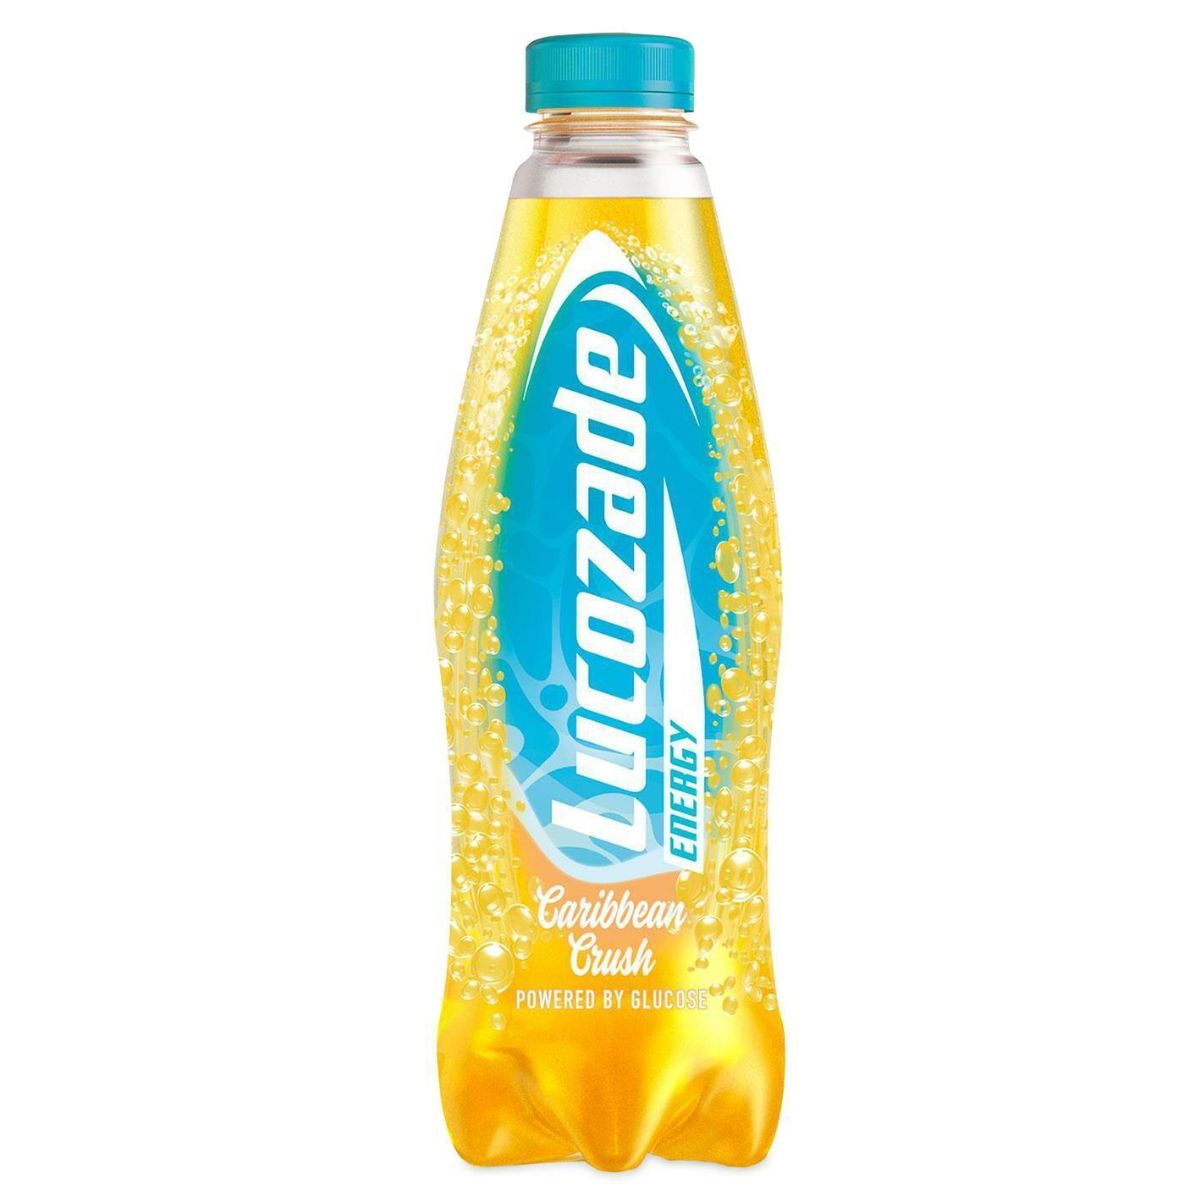 A bottle of Lucozade - Energy Drink Caribbean Crush - 500ml on a white background.